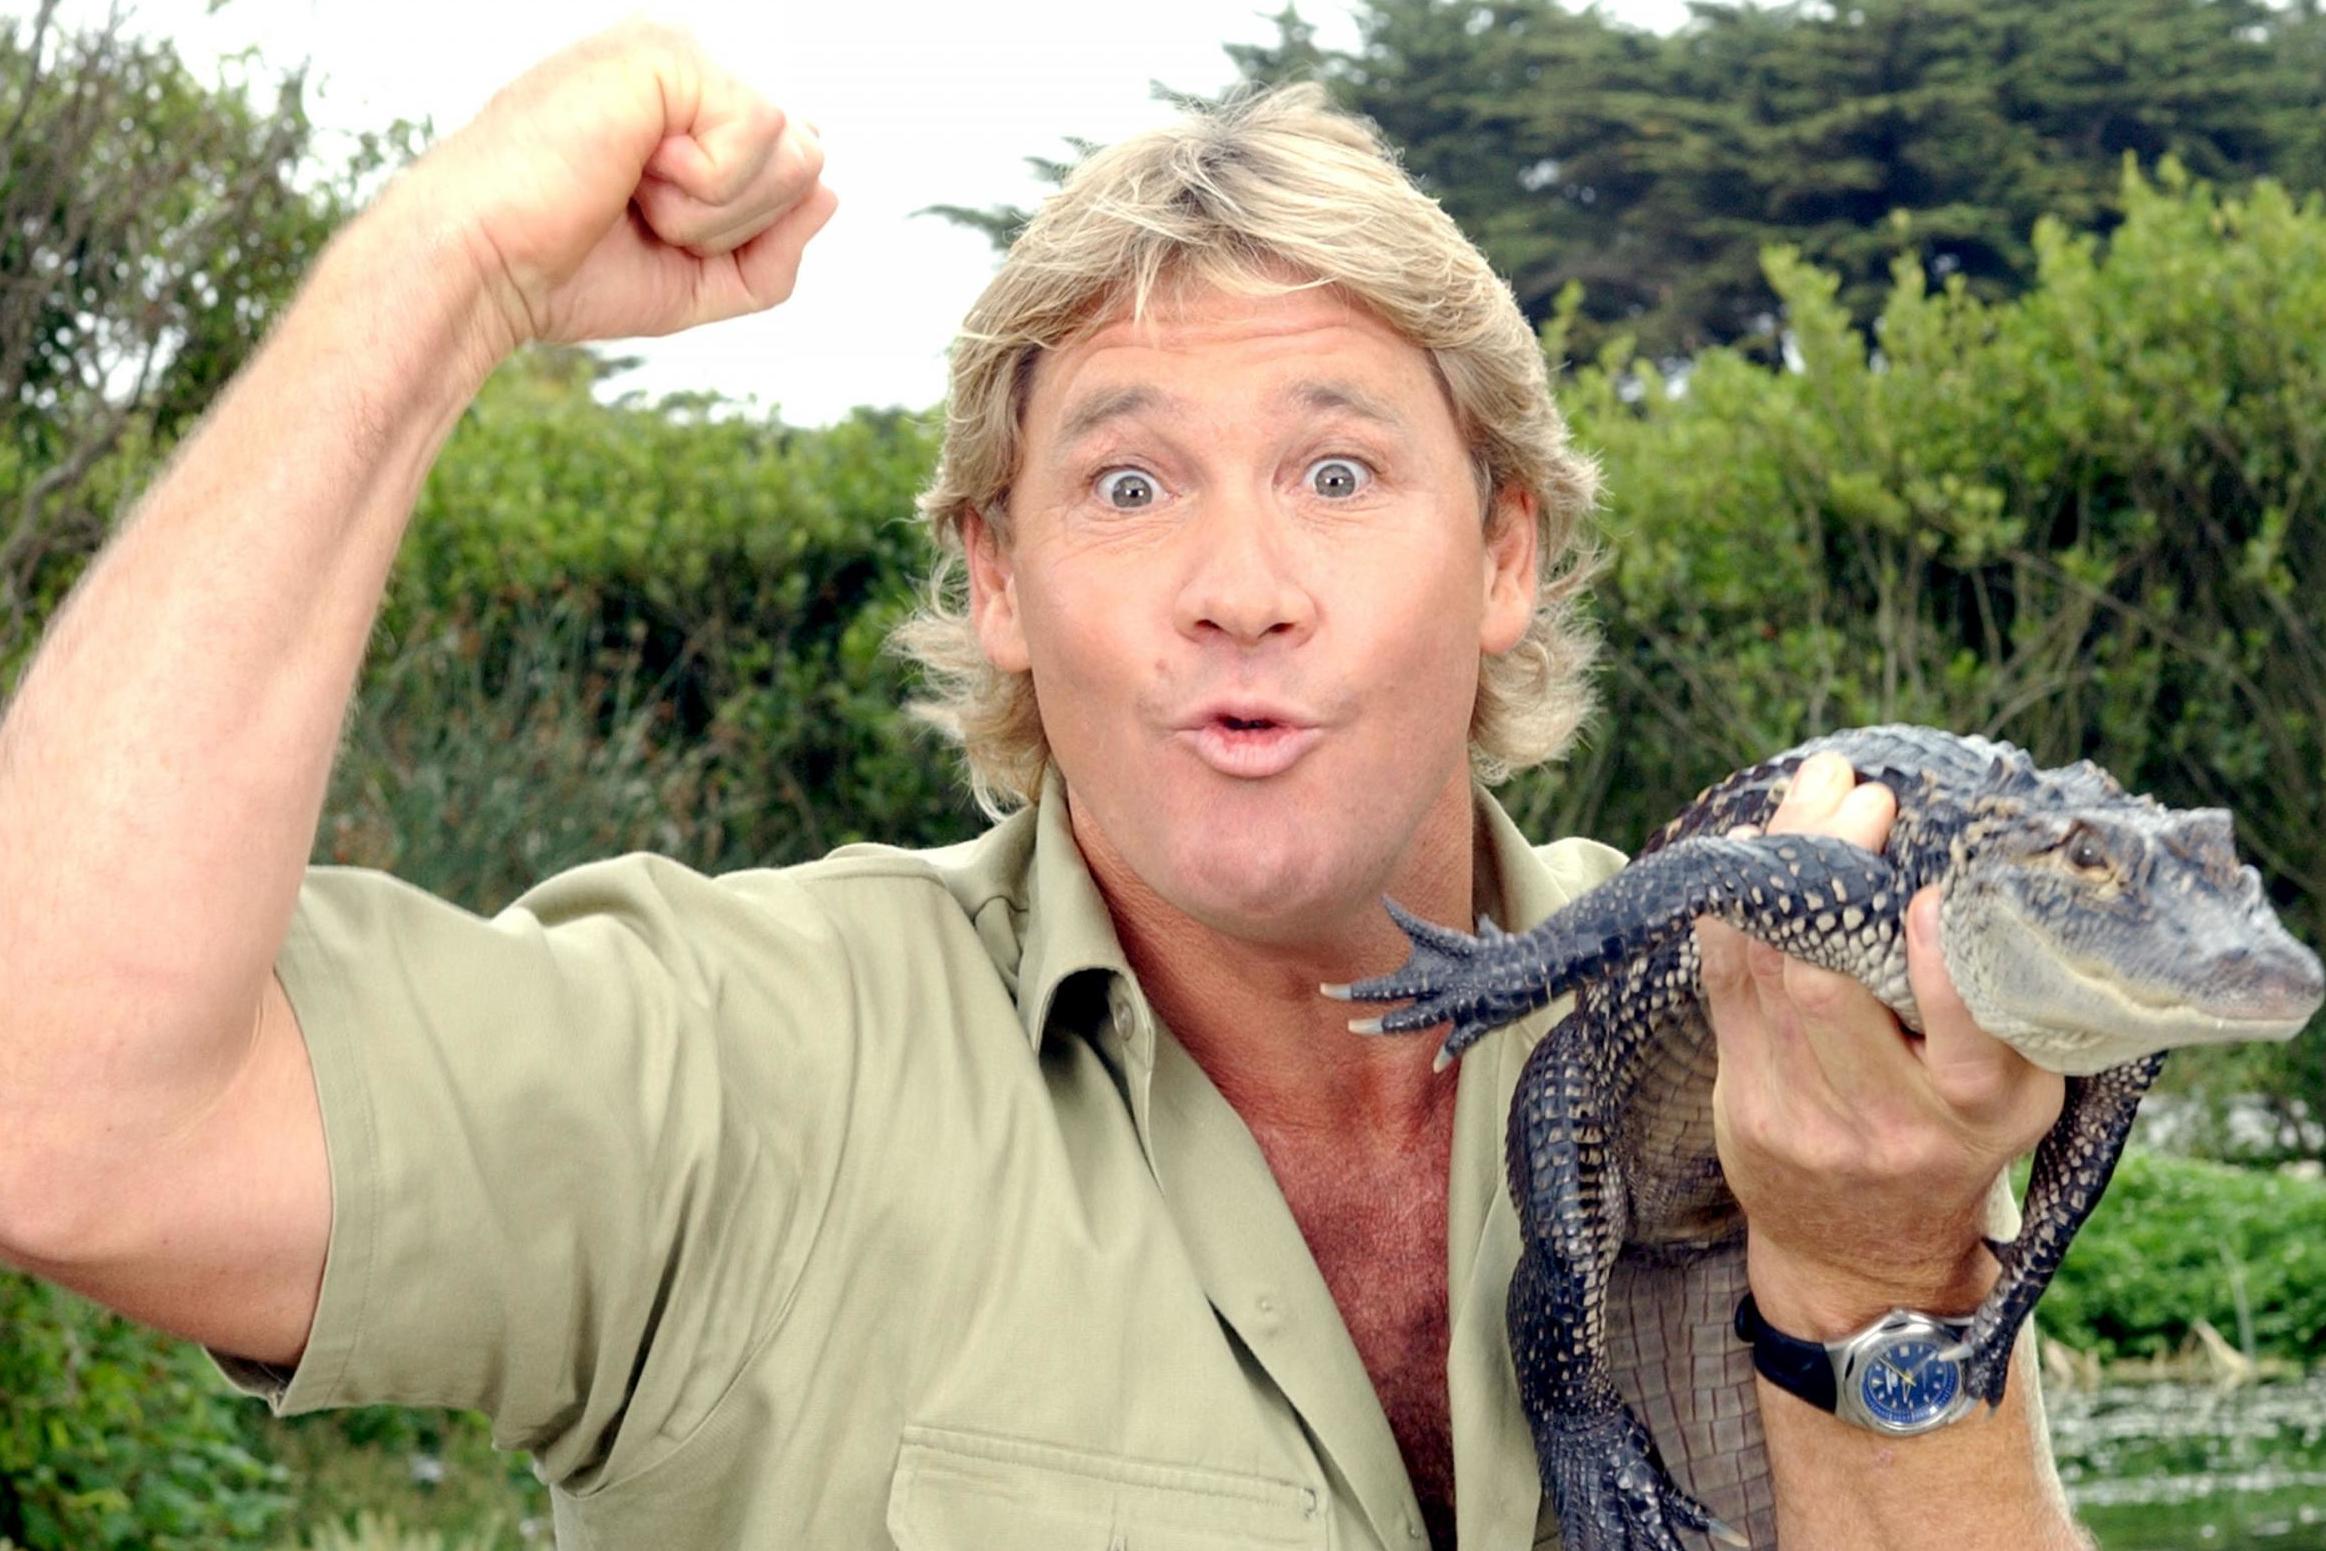 Steve Irwin, poses with a three foot long alligator at the San Francisco Zoo on 26 June, 2002 in San Francisco, California. (Photo by Justin Sullivan/Getty Images)